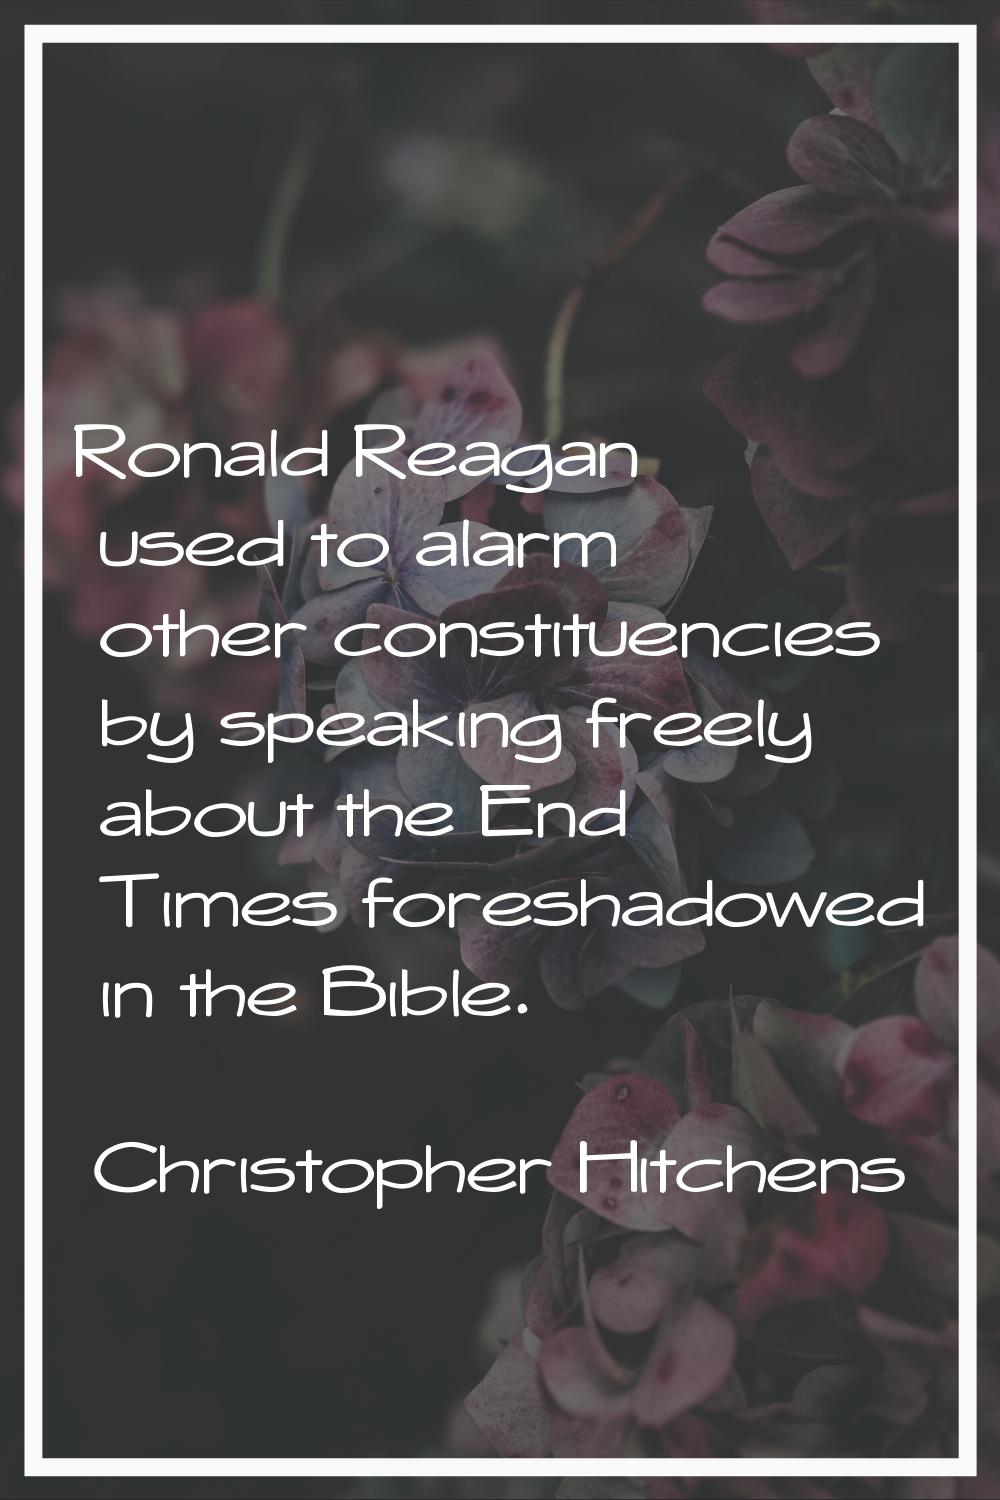 Ronald Reagan used to alarm other constituencies by speaking freely about the End Times foreshadowe